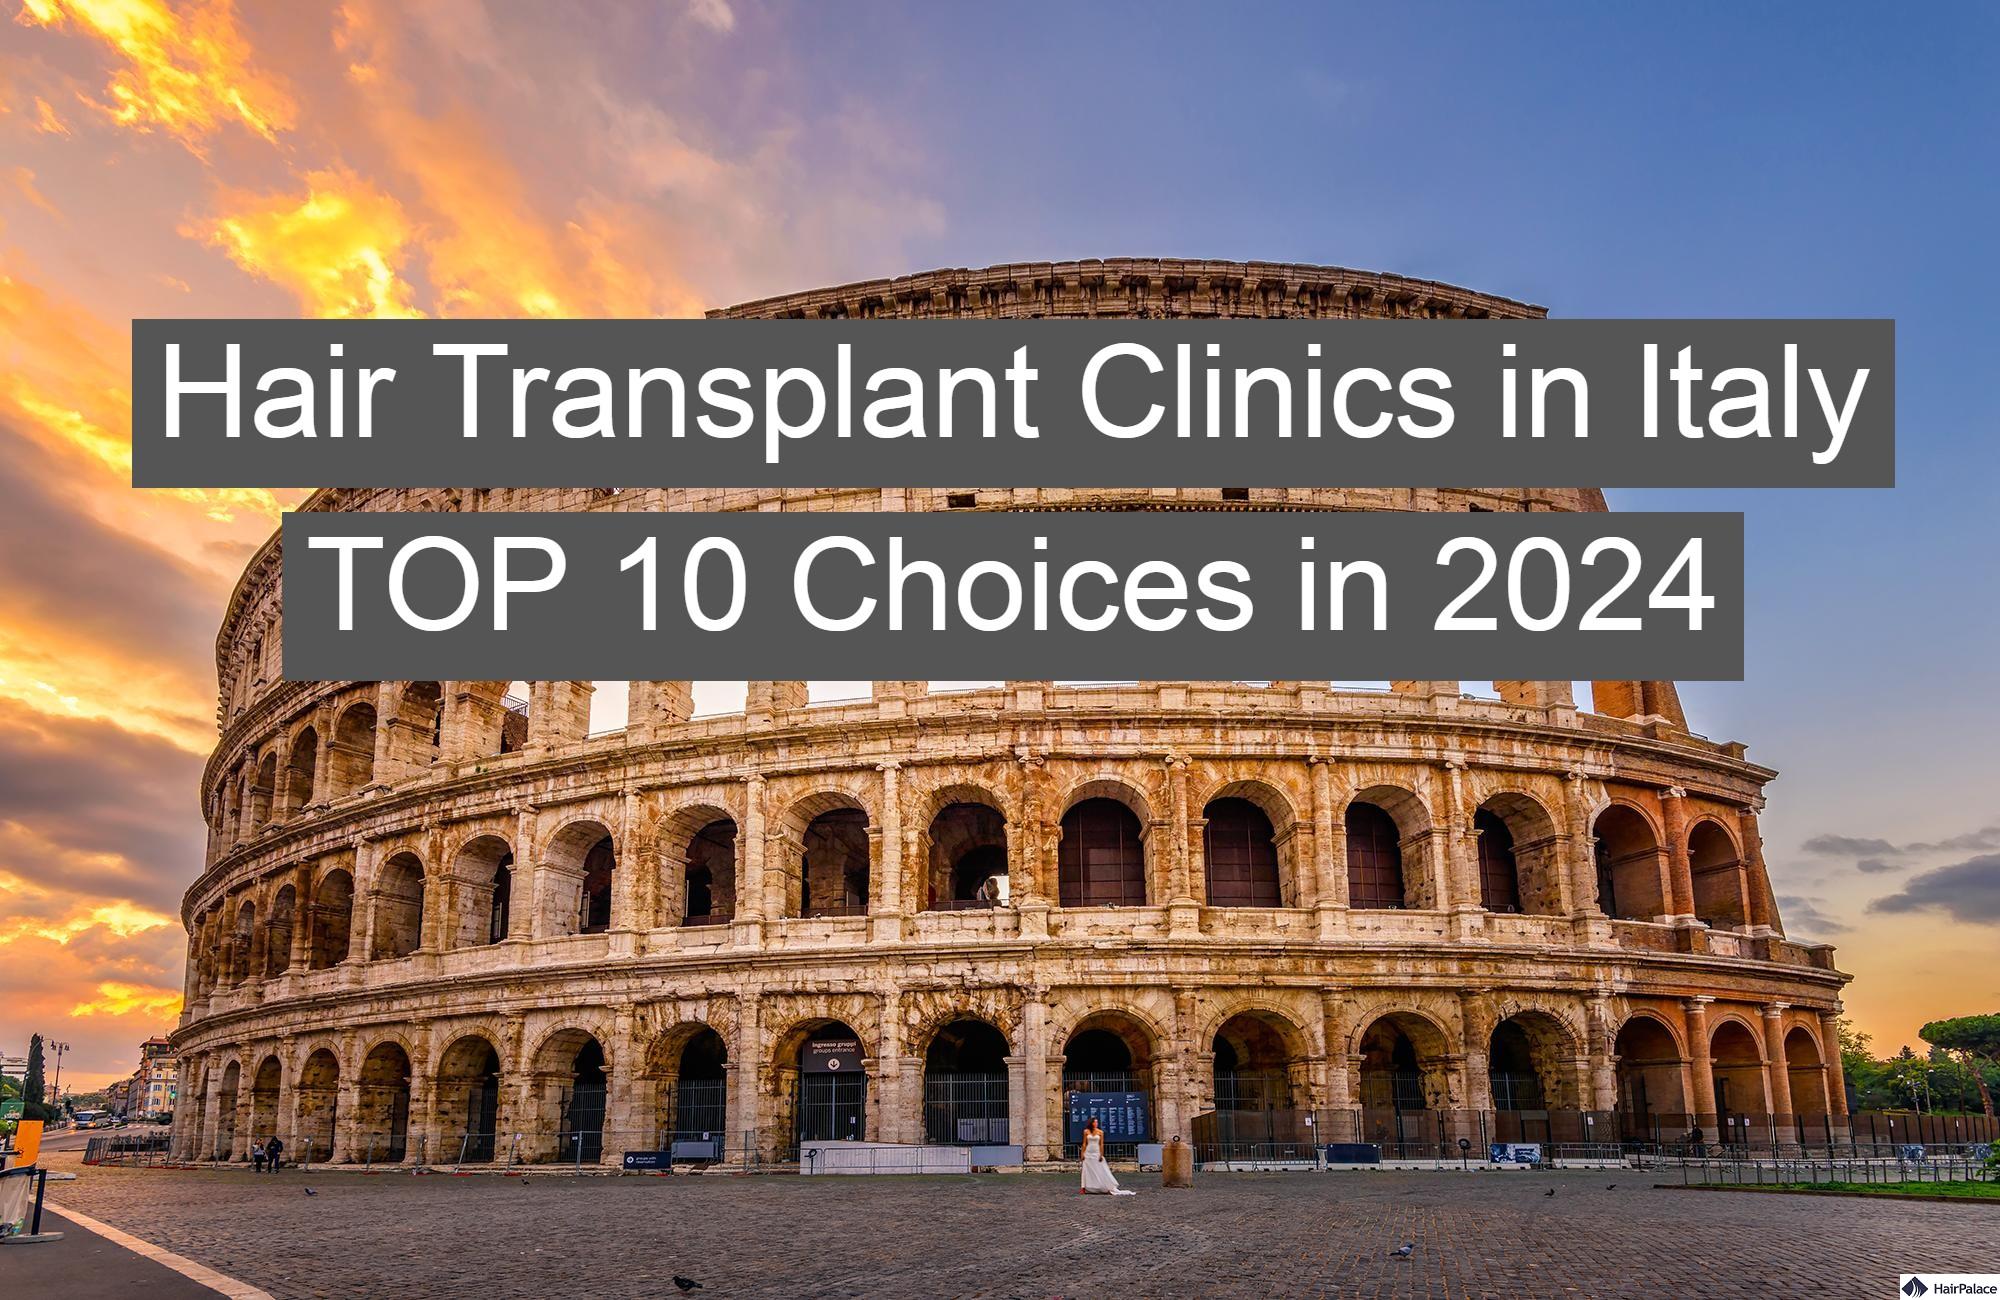 hair transplant clinics in italy top 10 choices in 2024